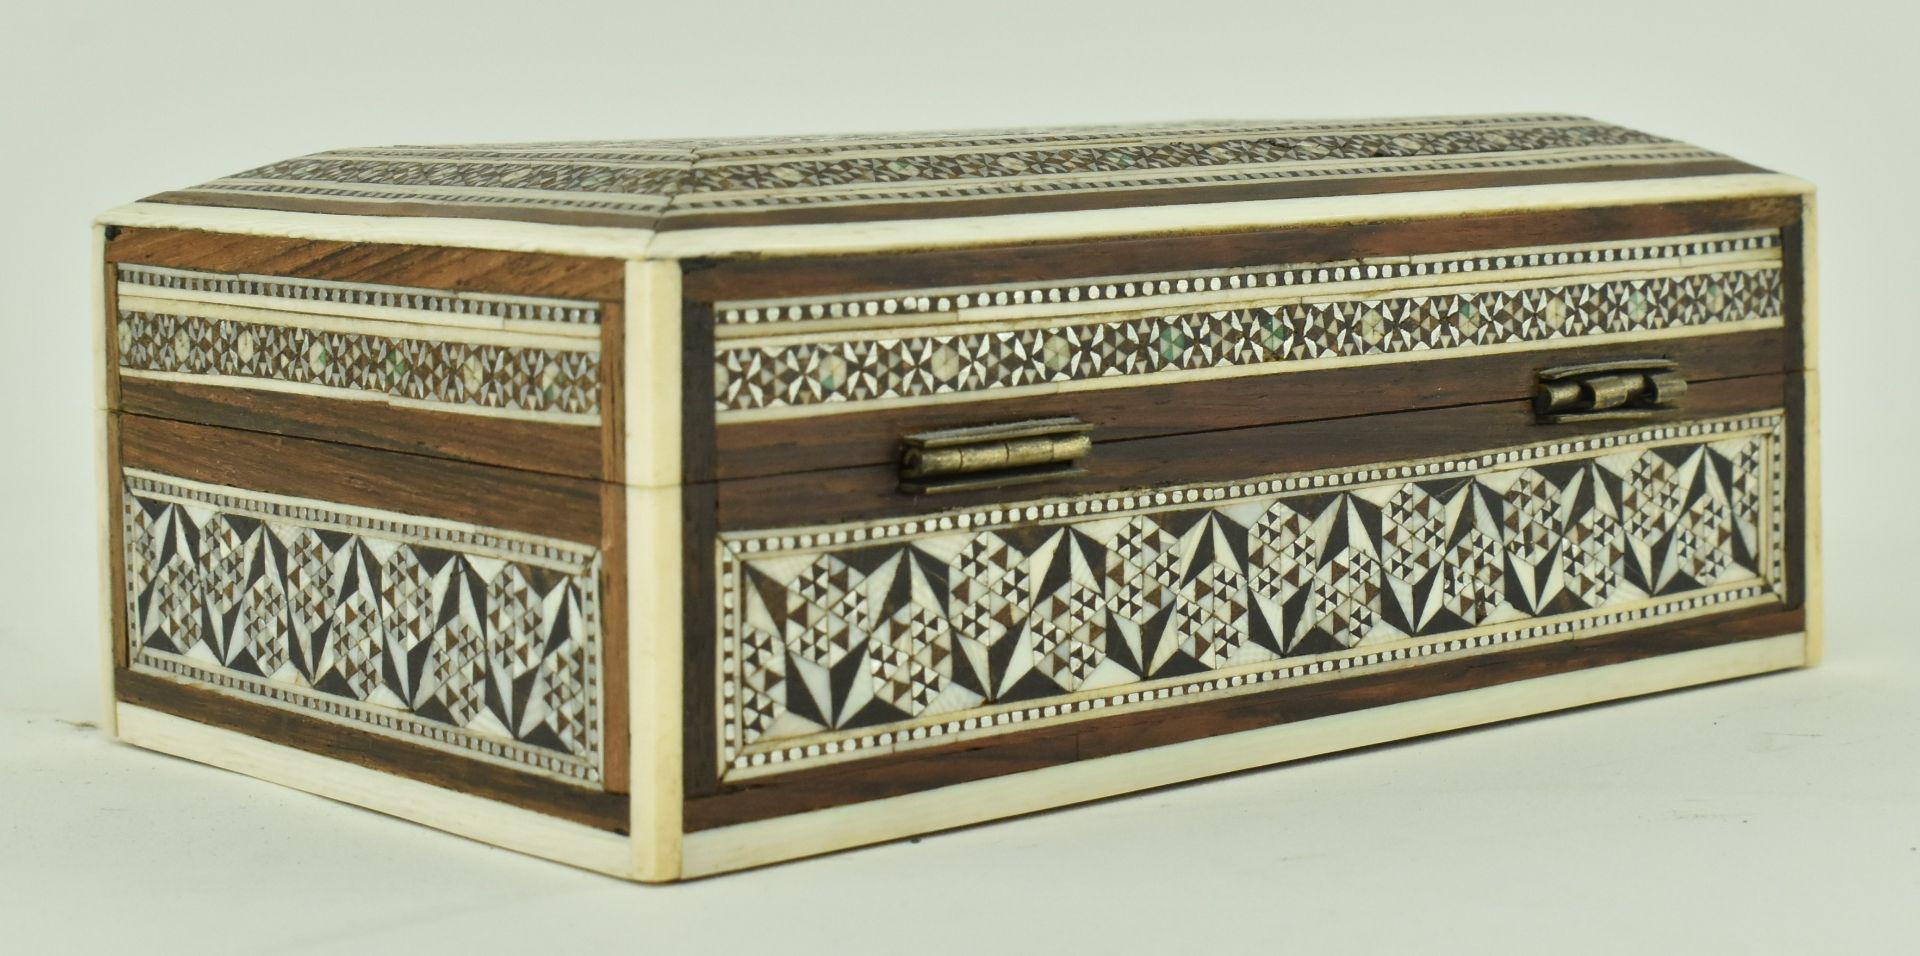 20TH CENTURY ISLAMIC WOODEN INLAY MARQUETRY BOX WITH KEY - Image 5 of 7